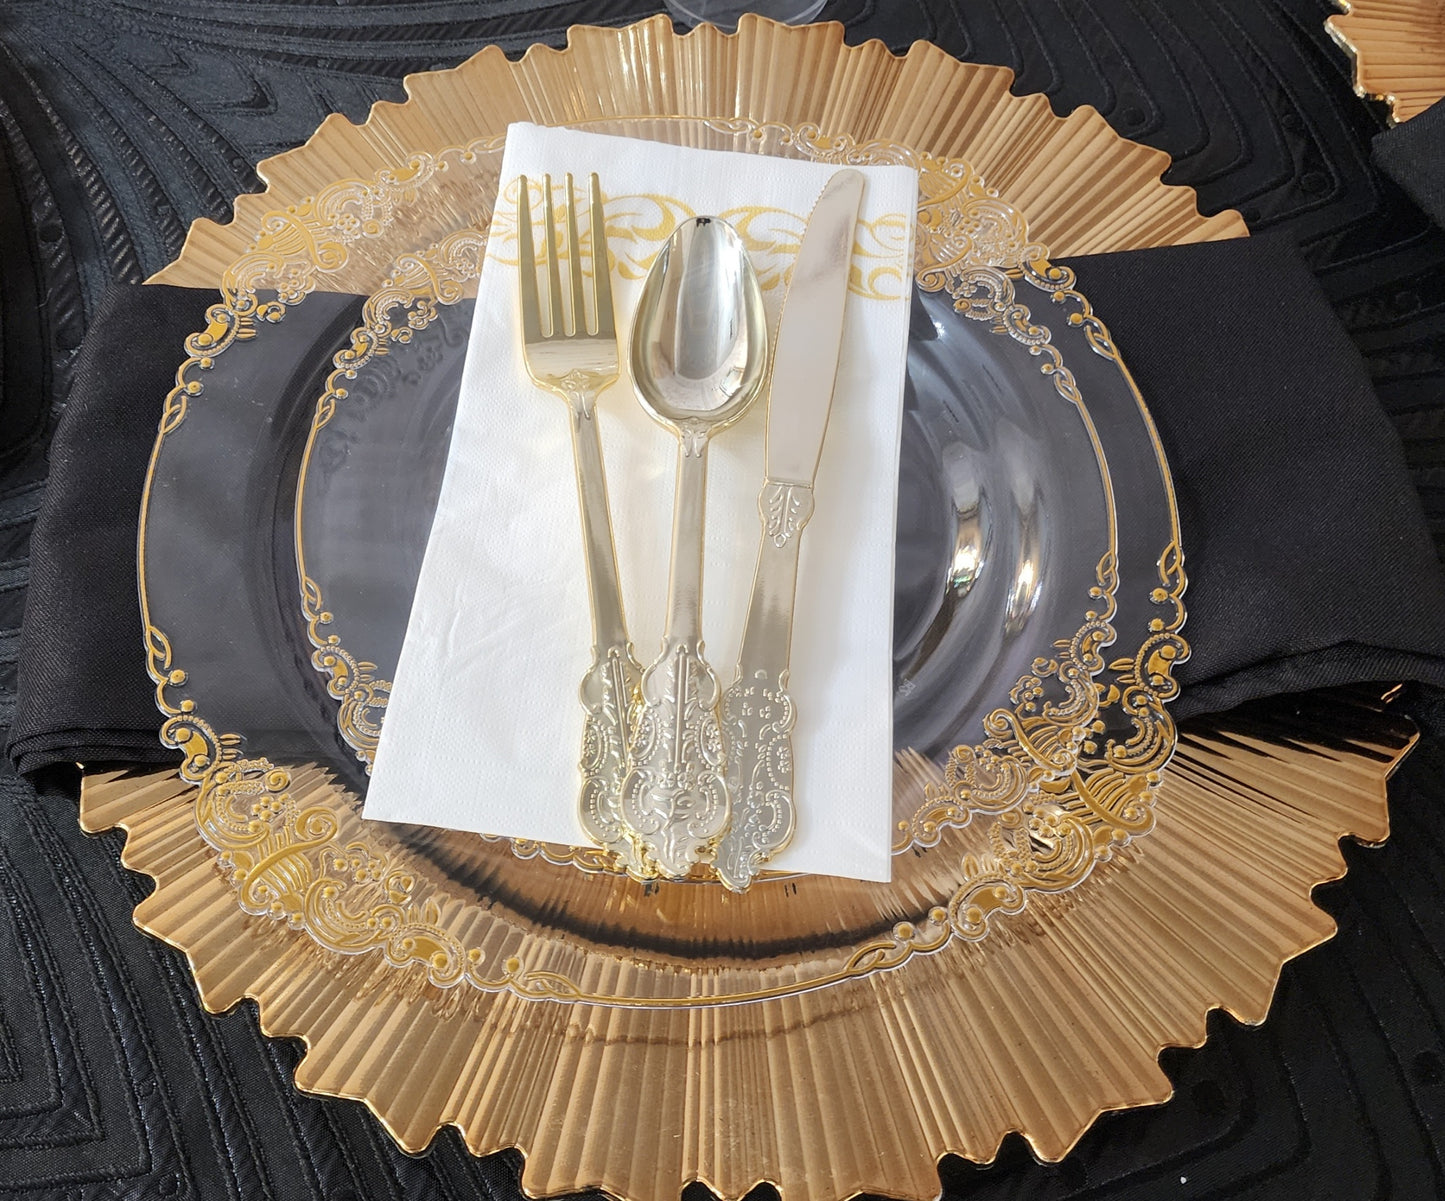 White and gold charger plate